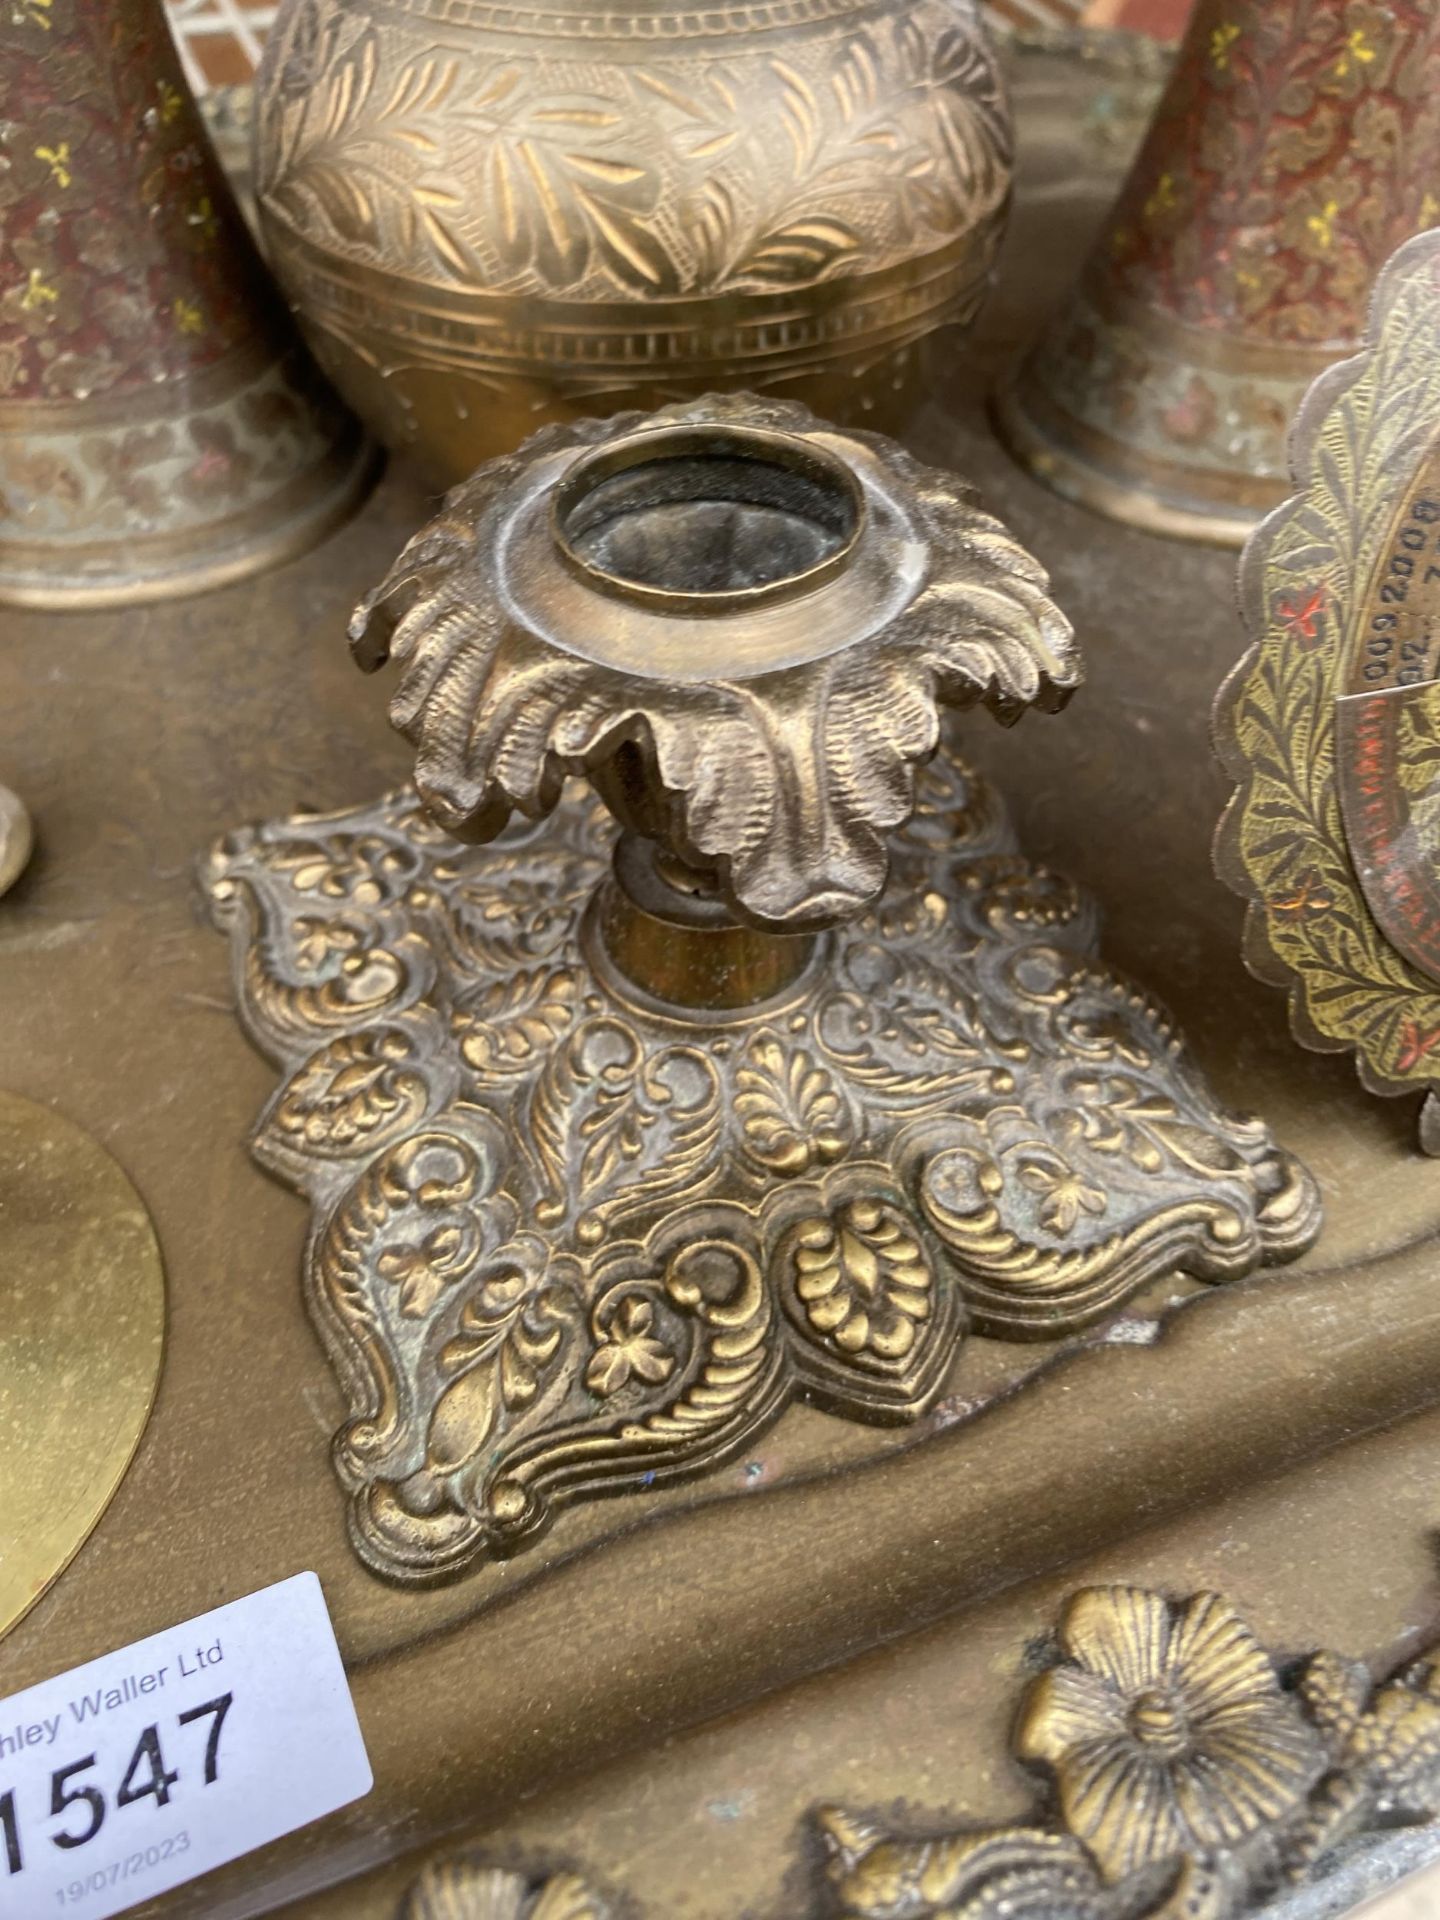 AN ASSORTMENT OF VINTAGE AND DECORATIVE BRASS WARE TO INCLUDE A TRAY, CANDLESTICKS AND CLOISONNE - Image 8 of 9